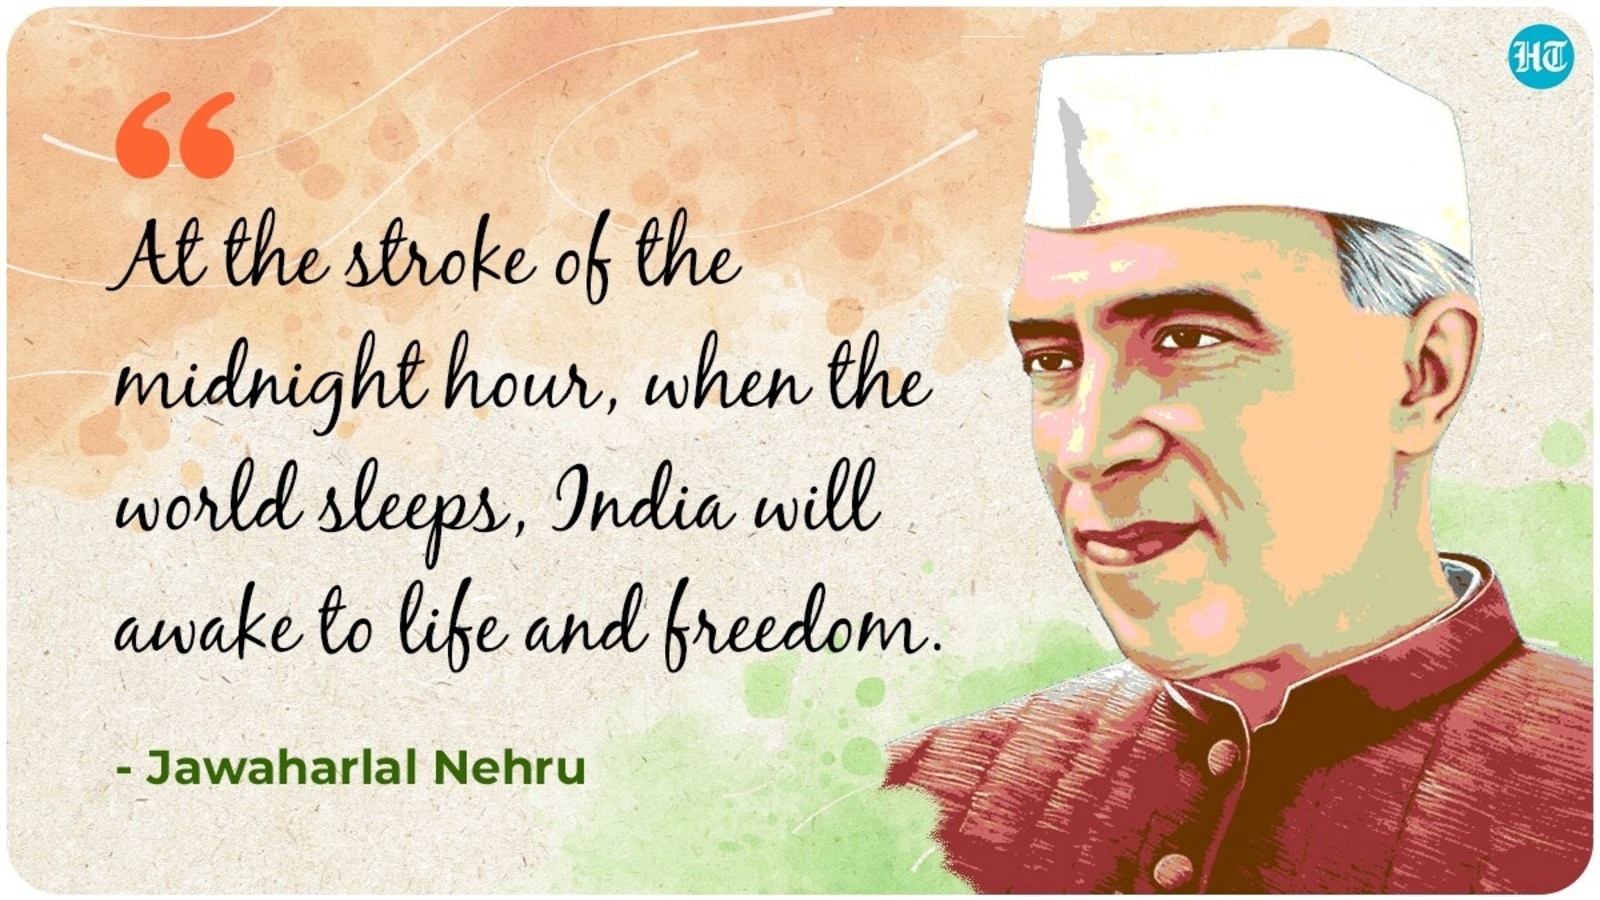 75th Independence Day: Best quotes, images, wishes, messages to ...